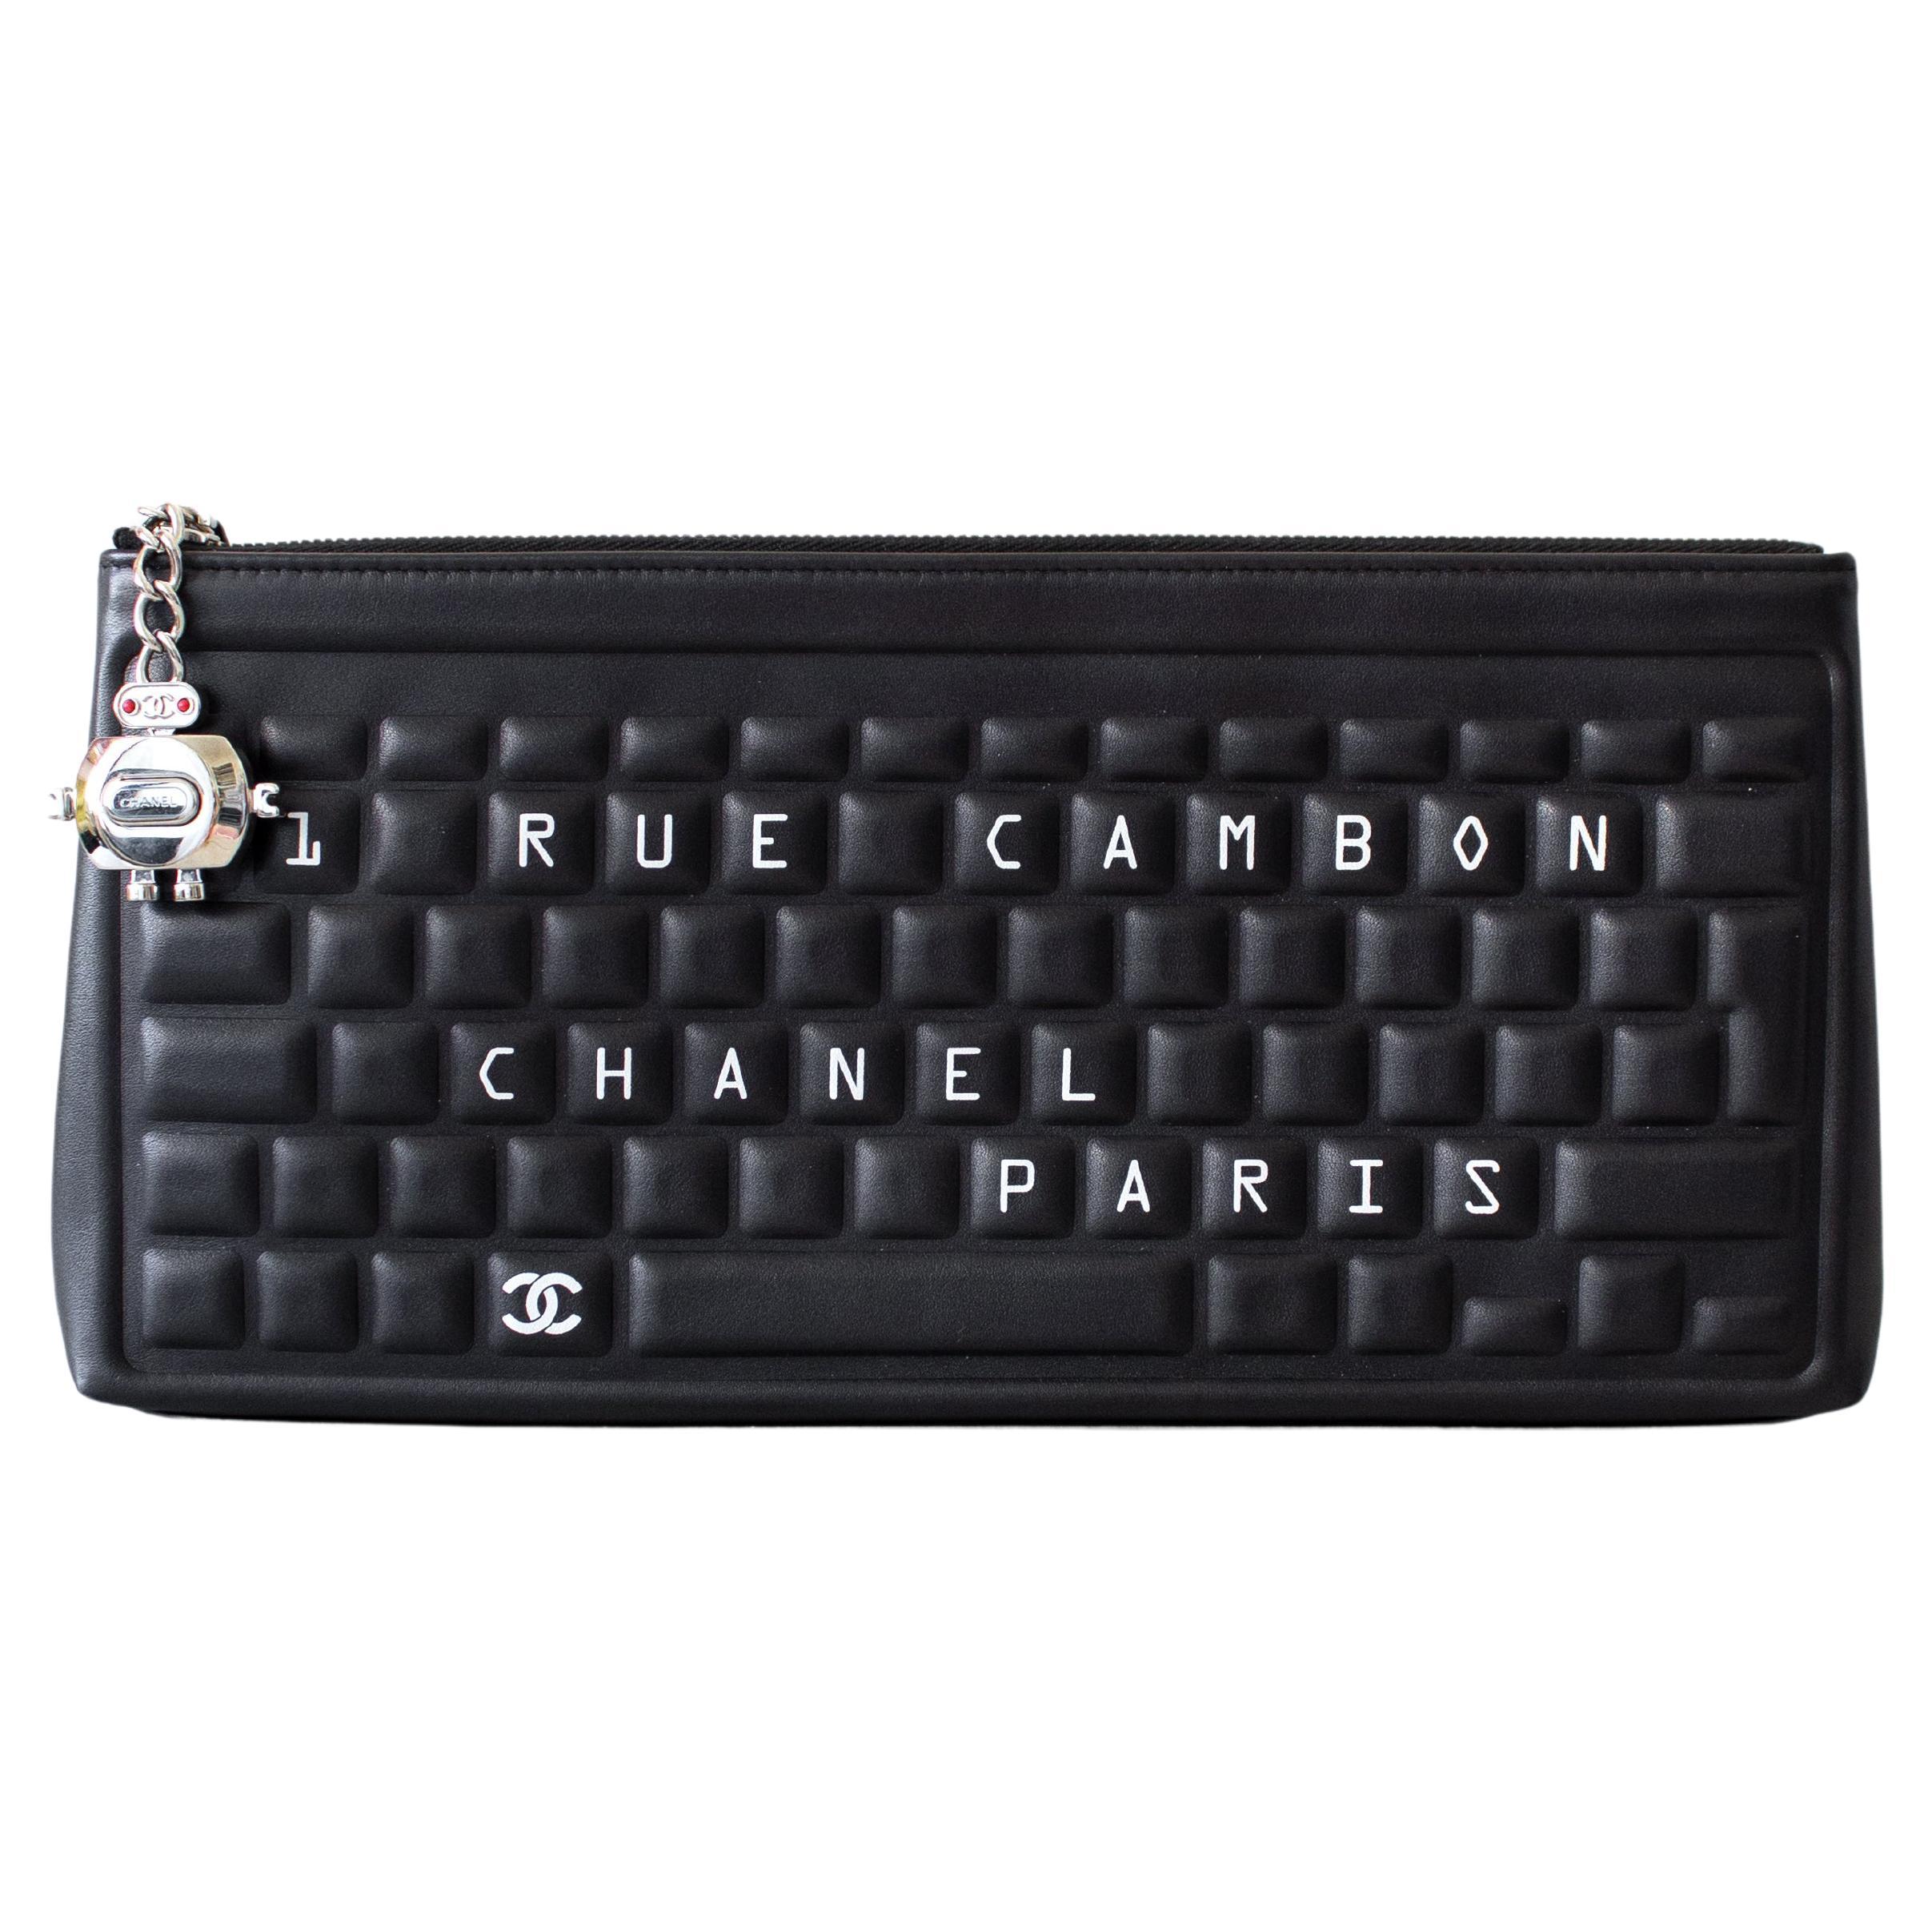 Chanel S/S 2017 Data Center Black Silver Robot Cocobot Leather Keyboard Clutch 